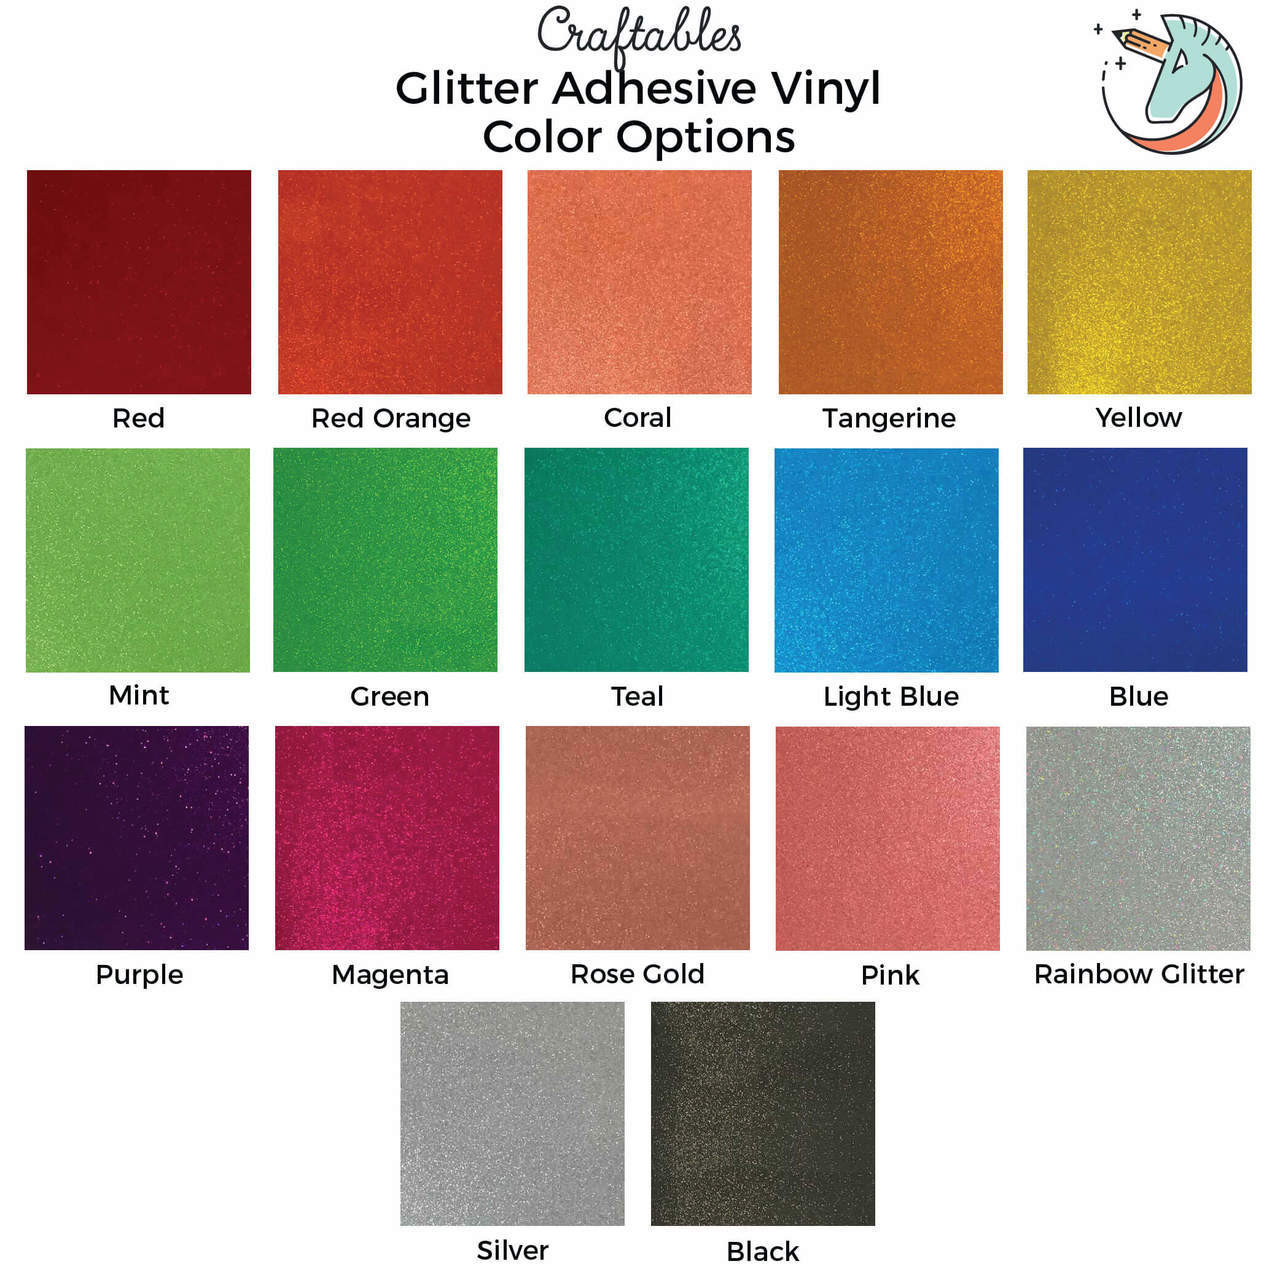 Light Blue Glitter Adhesive Vinyl Sheets By Craftables